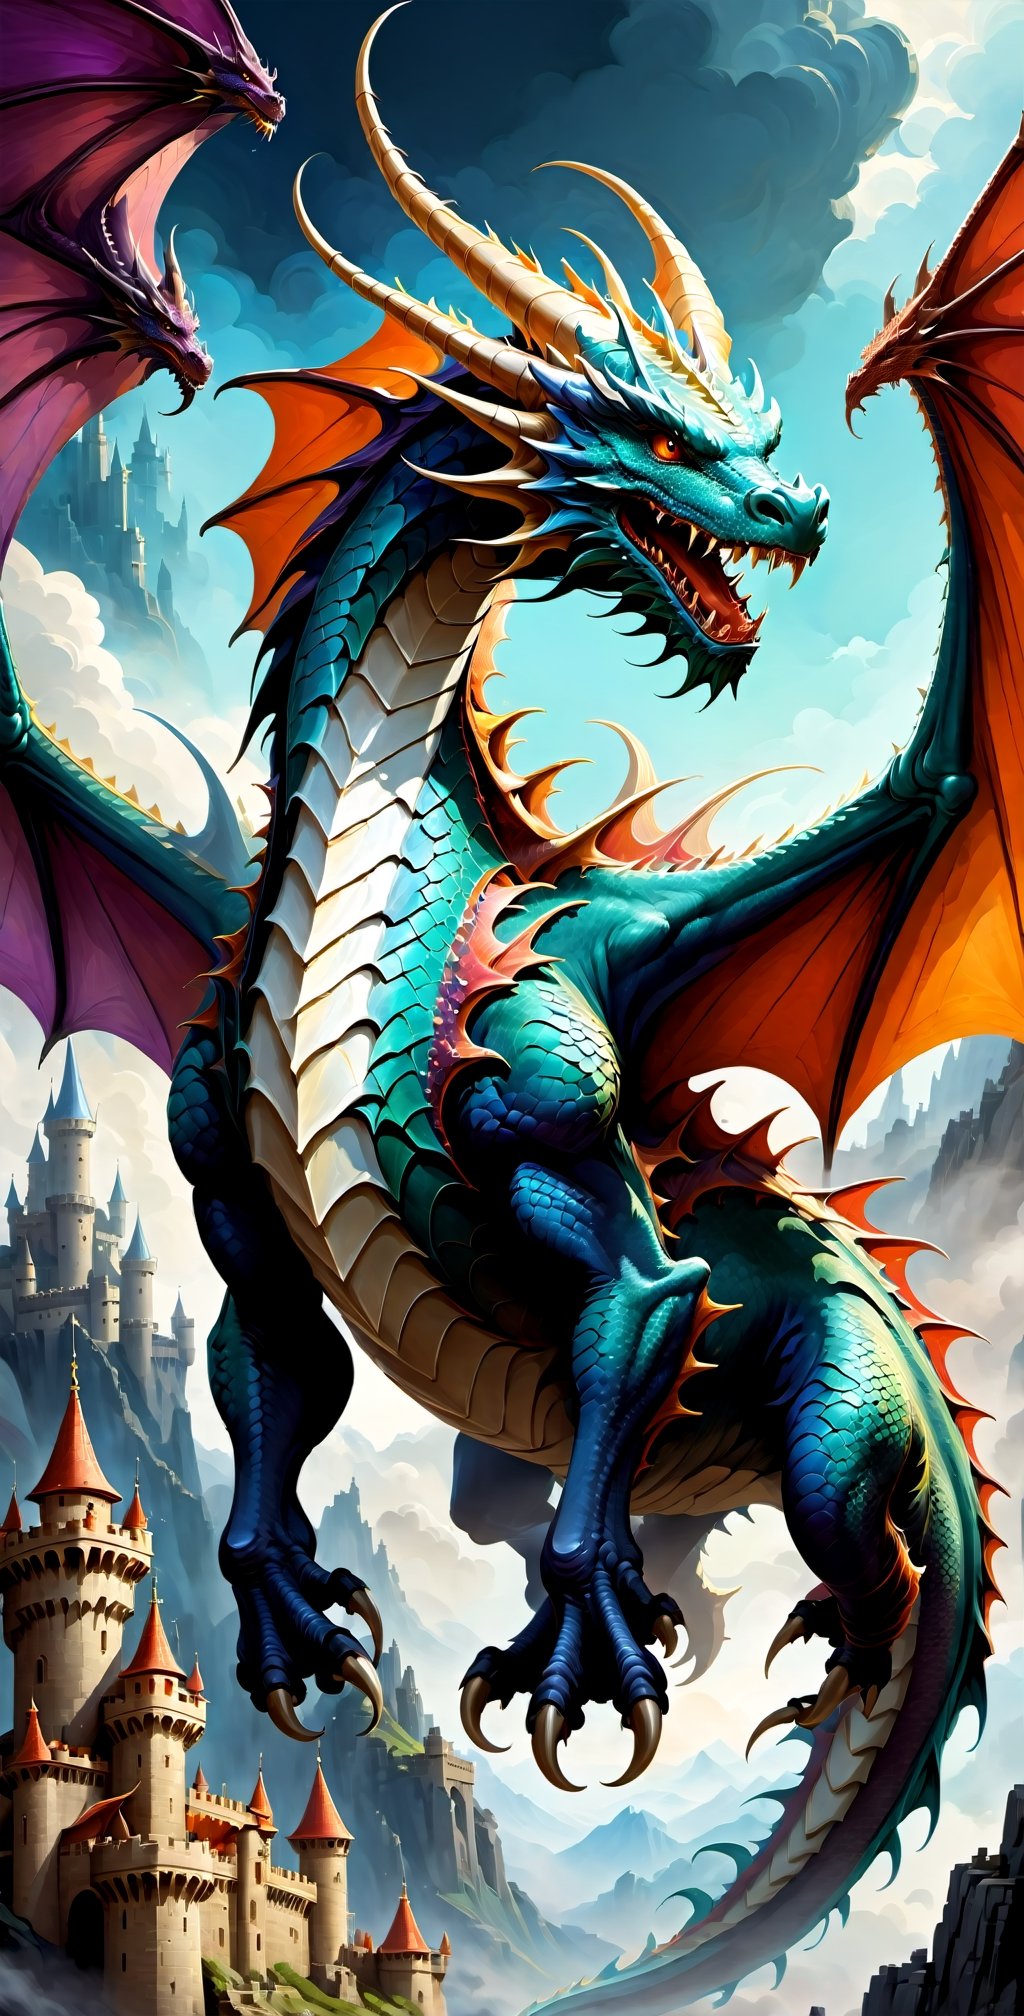 Create a digital illustration of a ((("Fantasy Dragon"))) inspired by the works of renowned fantasy artist Wayne Reynolds. The dragon should be in a dynamic mid-flight pose against a backdrop of an ancient, sprawling castle. Apply a detailed and painterly art style, using rich, vivid colors and fine textures. The camera shot should be a dynamic extreme close-up to emphasize the dragon's fierce expression.